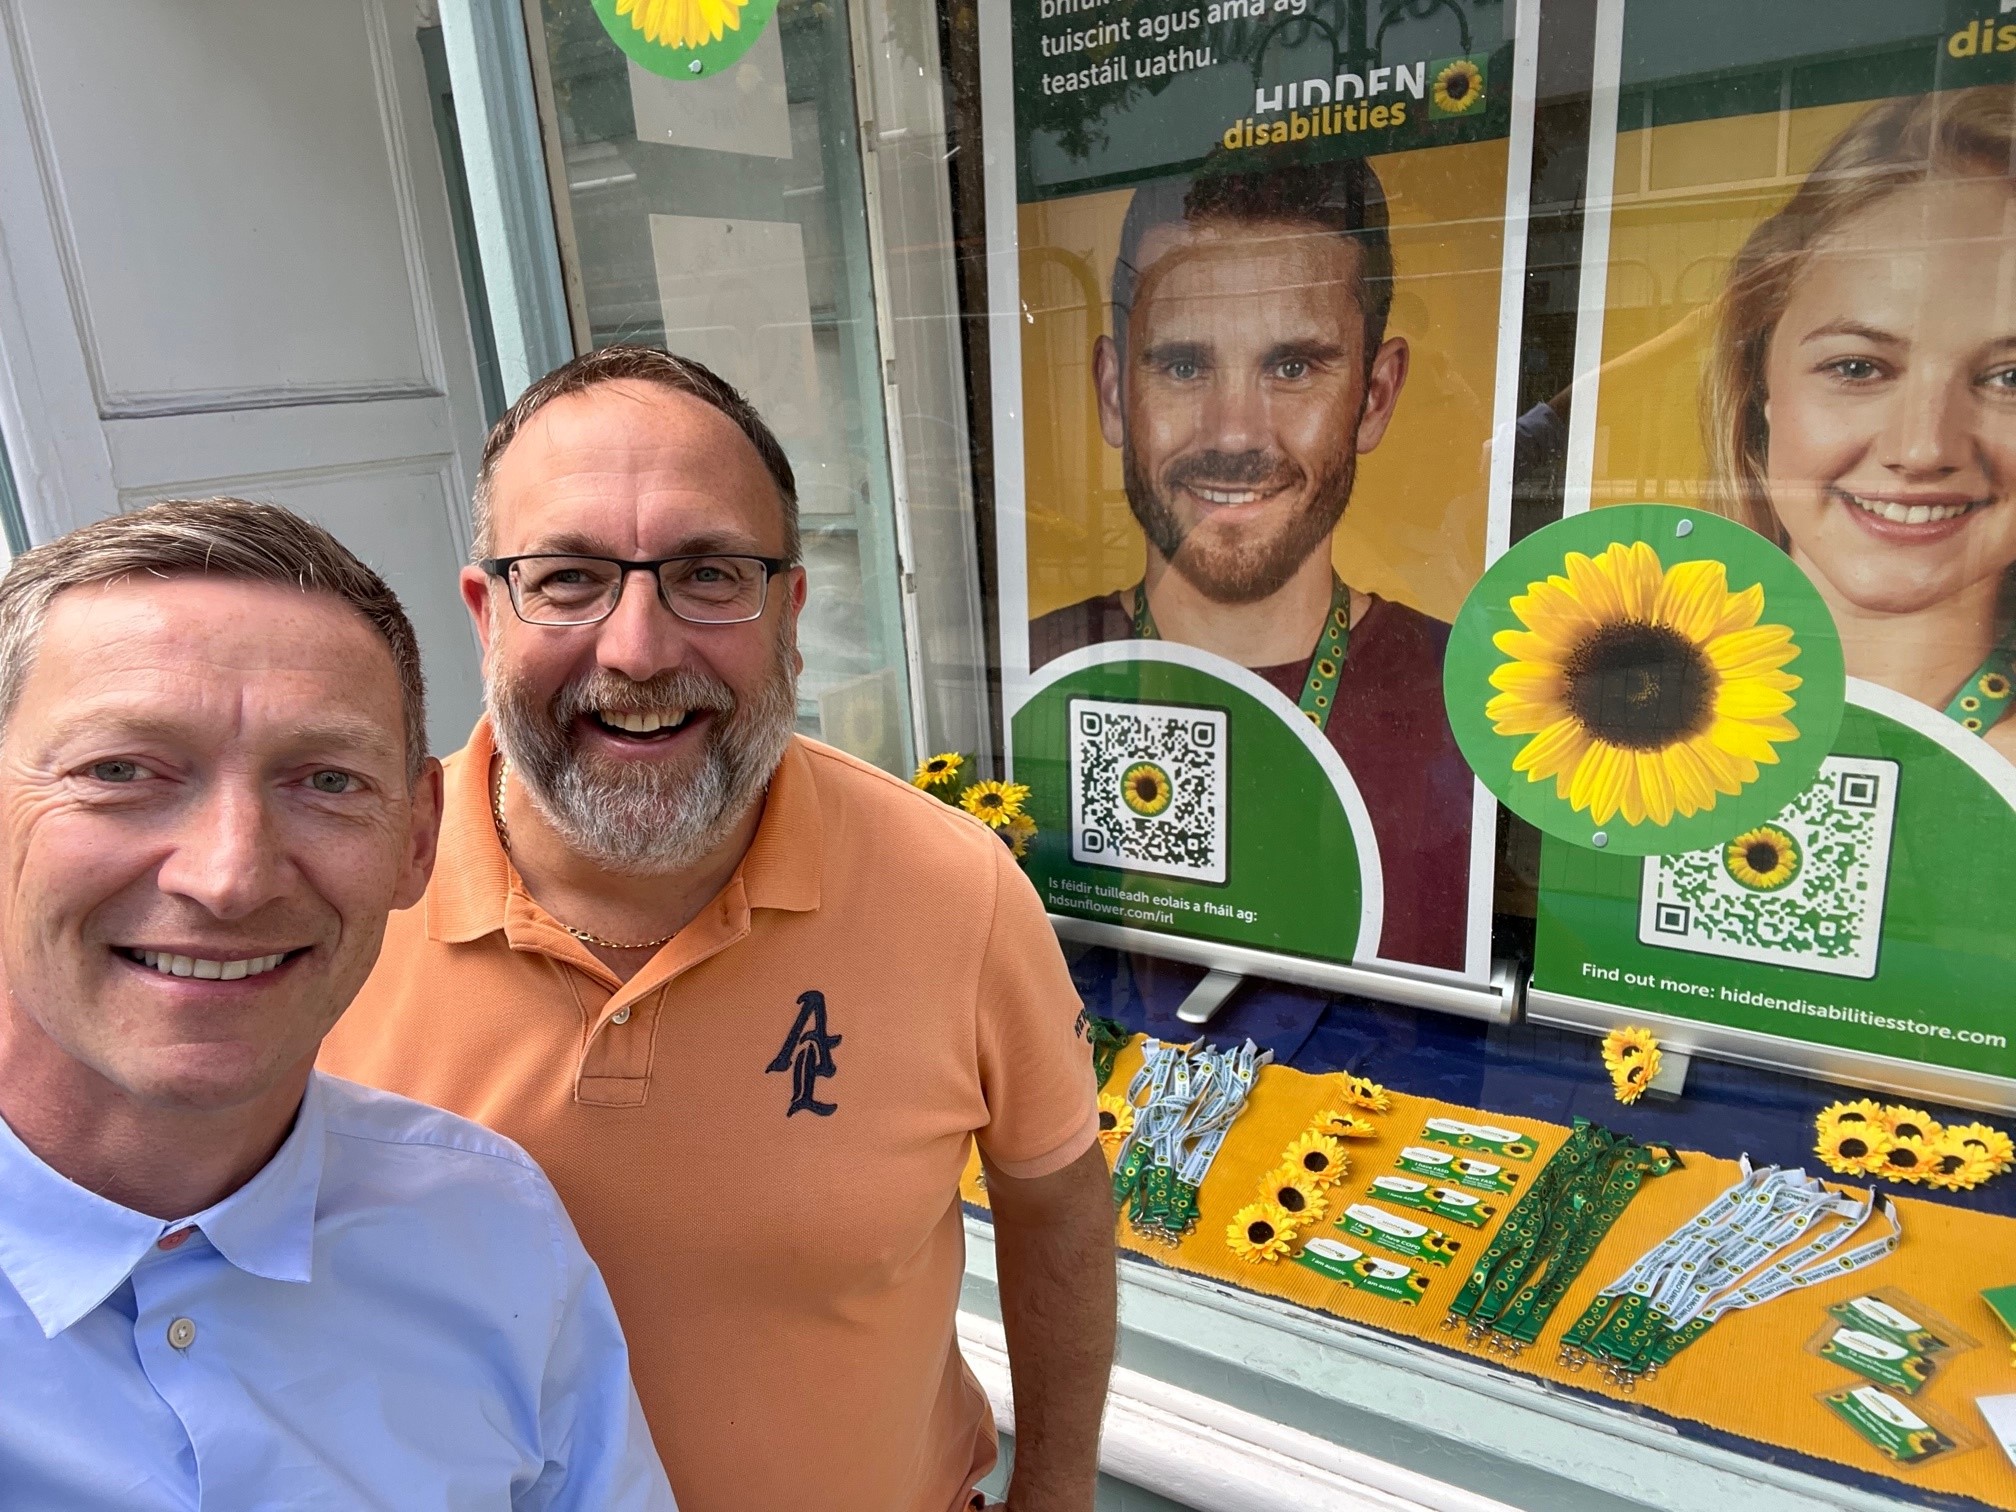 Paul and Tristan from Hidden Disabilities Sunflower stand outside the pop up shop in Ennis. A vibrant window display is visible. Showcasing Sunflower products